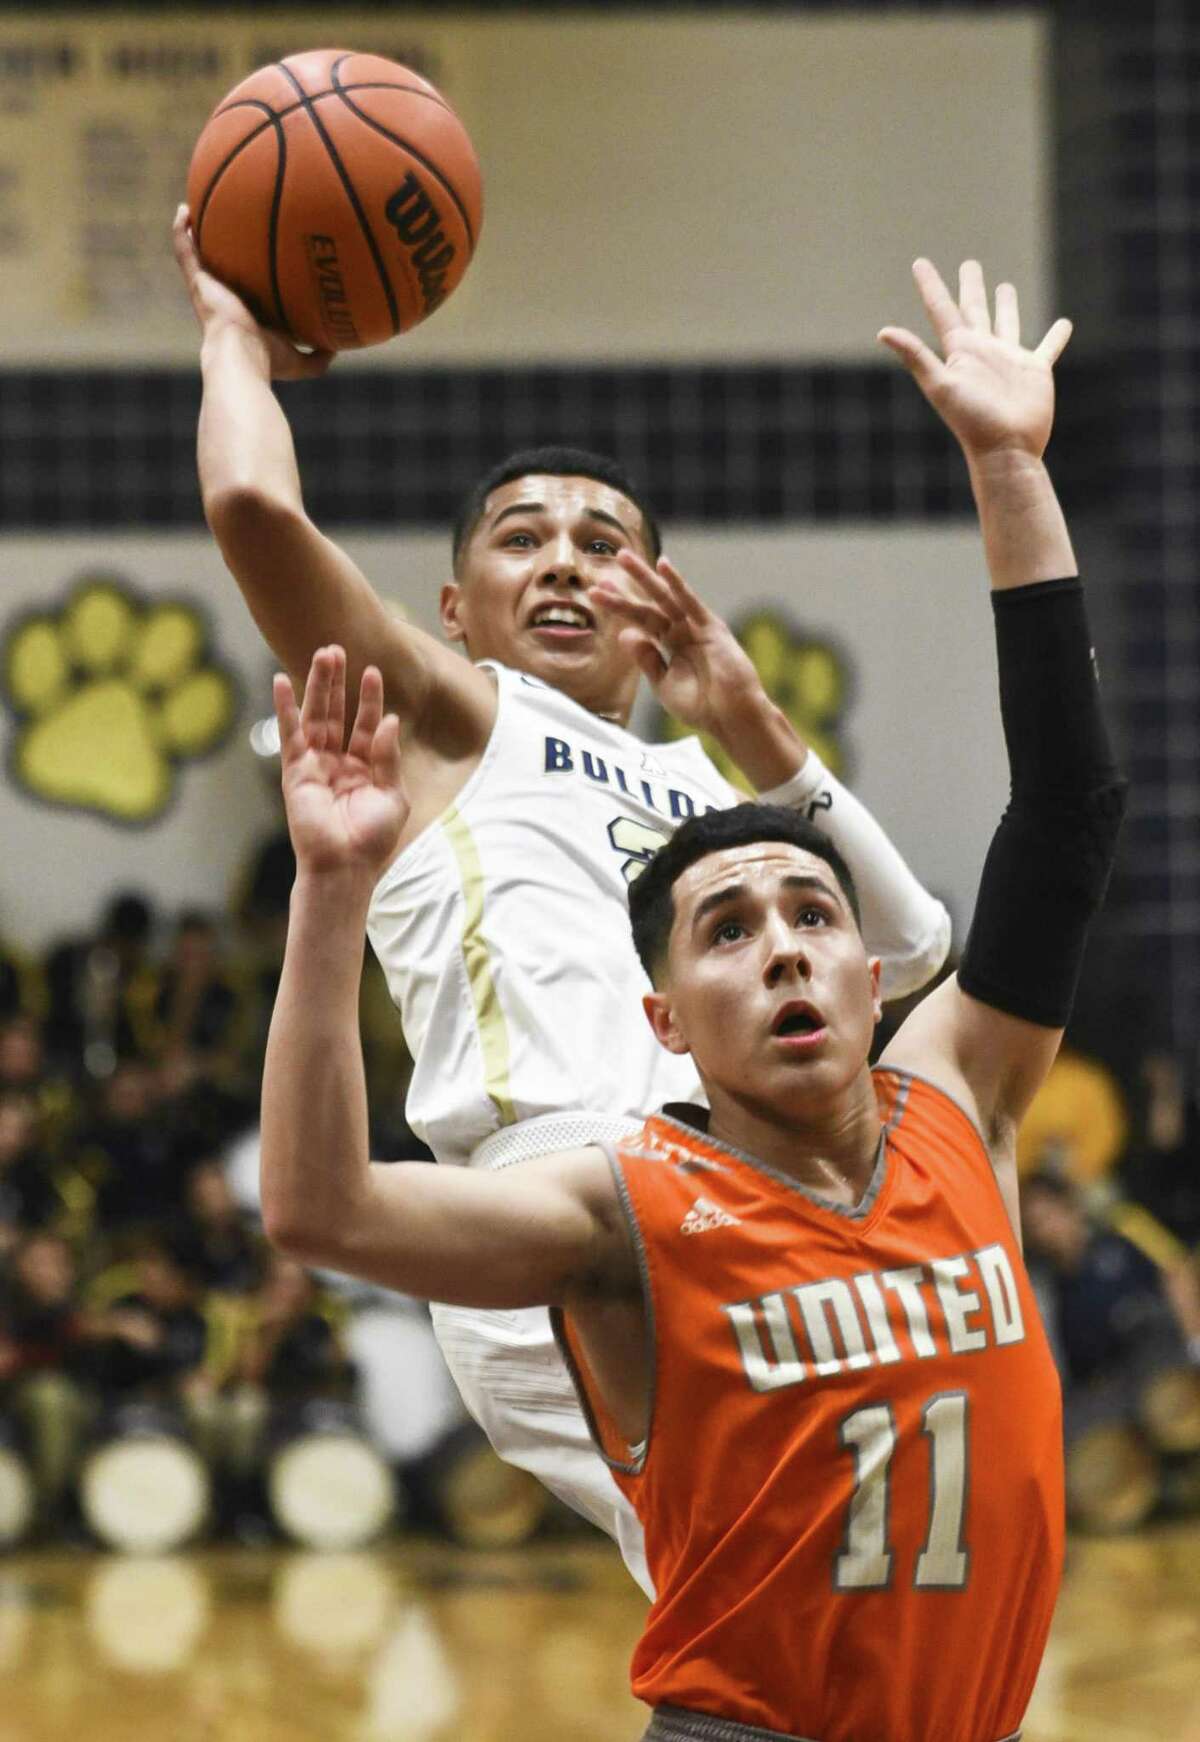 Jaime Uvalle and Alexander beat Economedes 61-43 Friday while Alex Idrogo and United won 31-27 over Weslaco as both advanced to the third round.